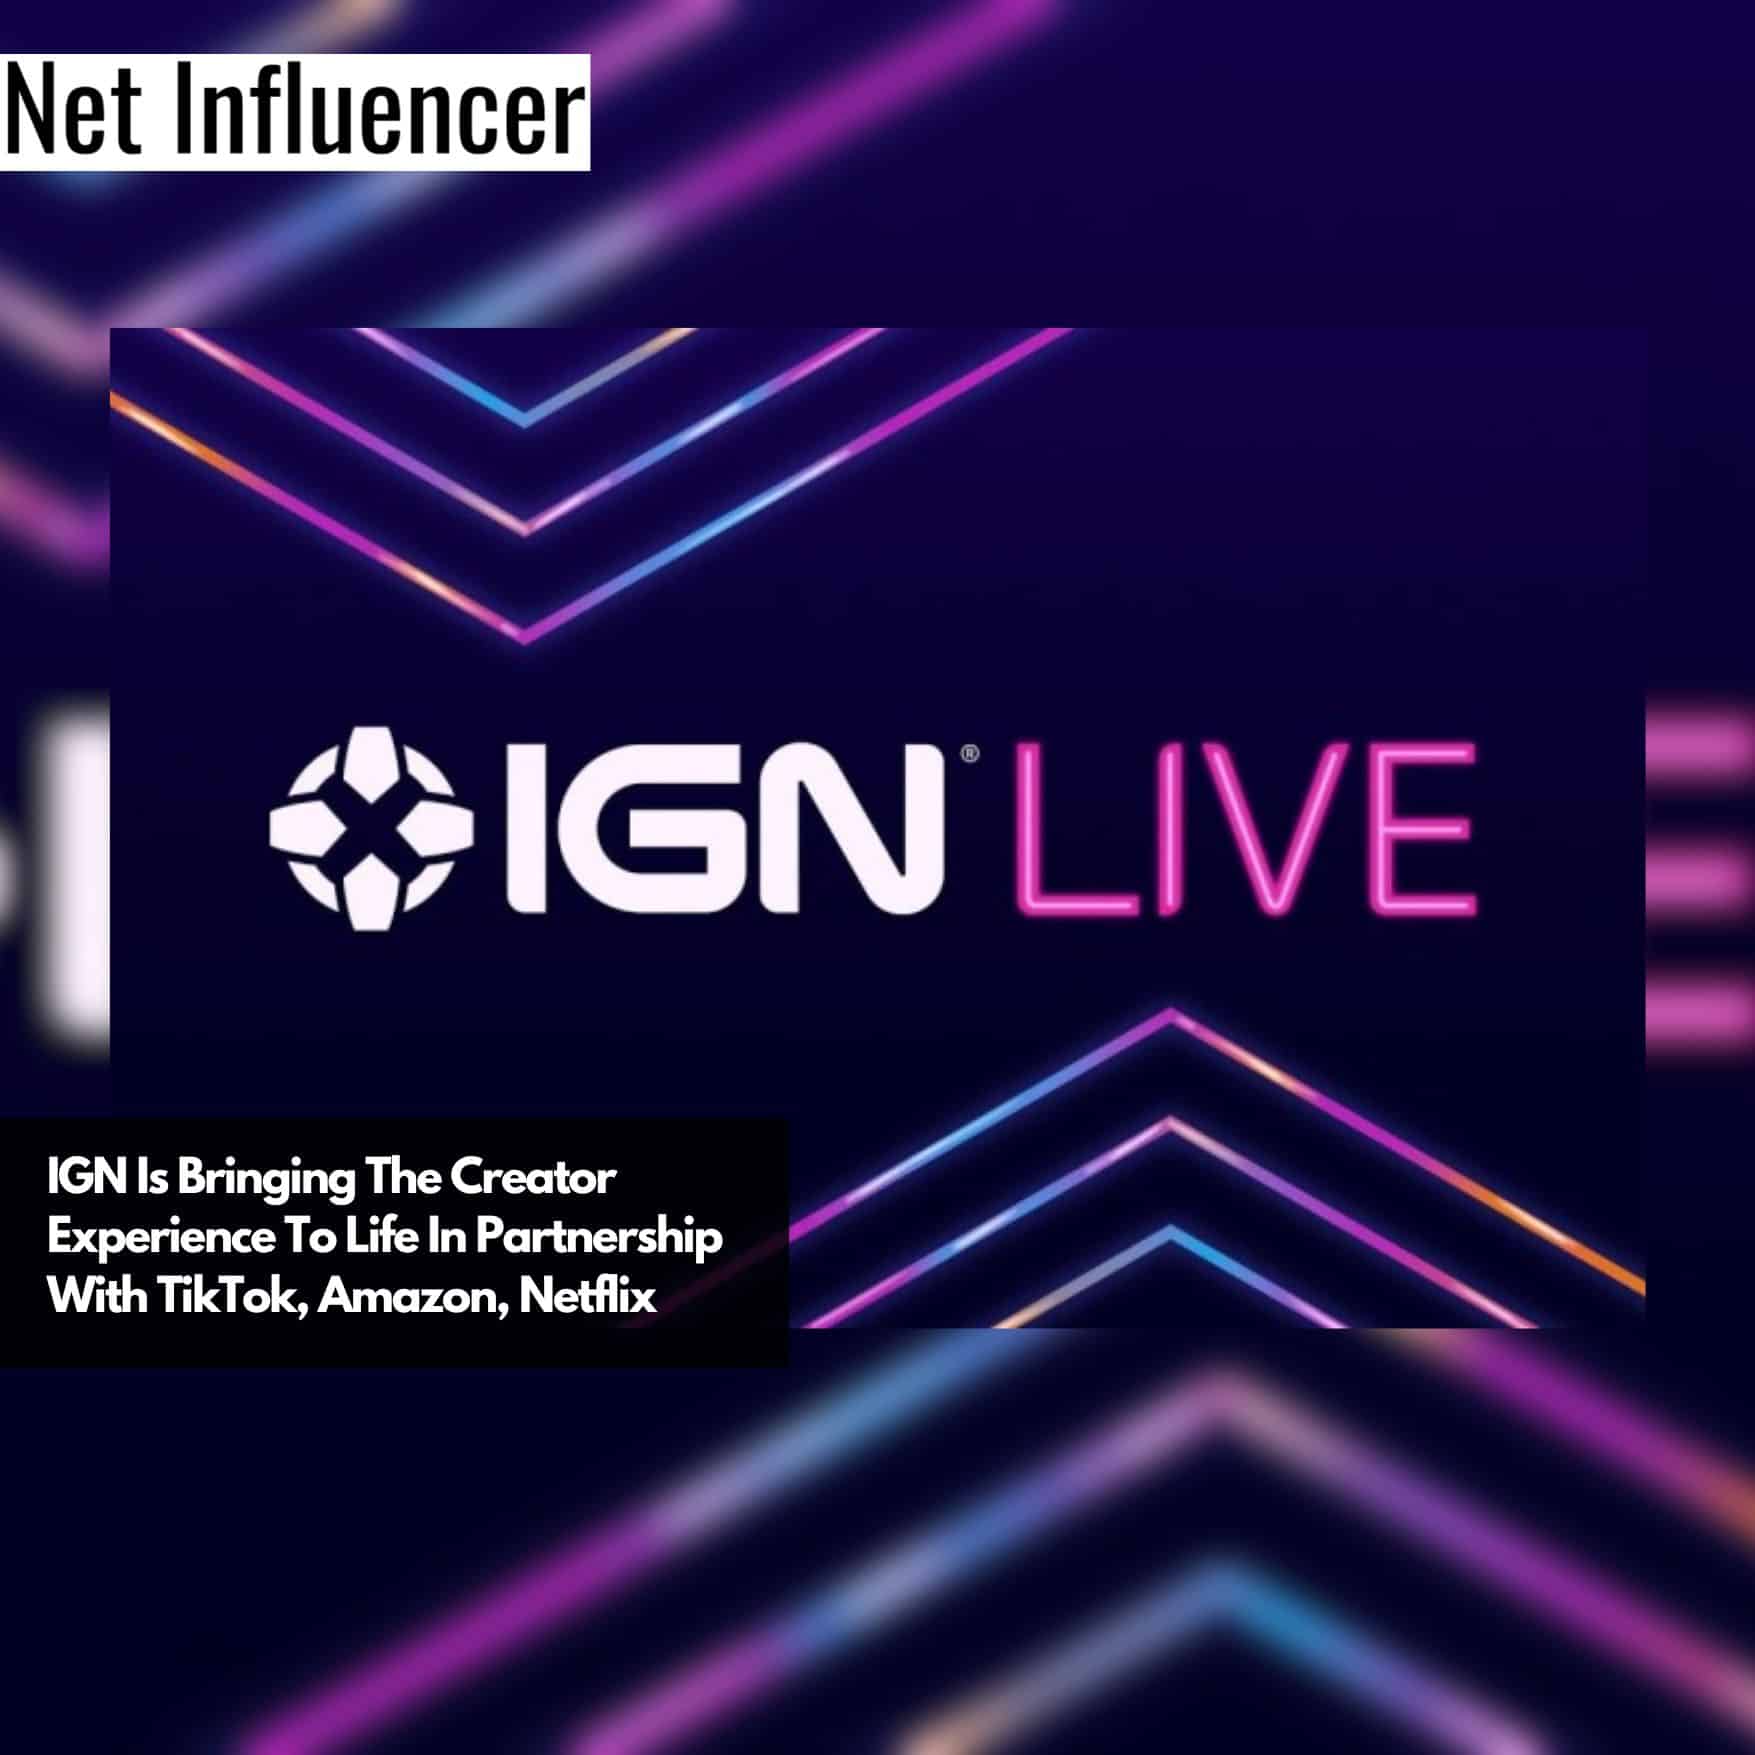 IGN Is Bringing The Creator Experience To Life In Partnership With TikTok, Amazon, Netflix